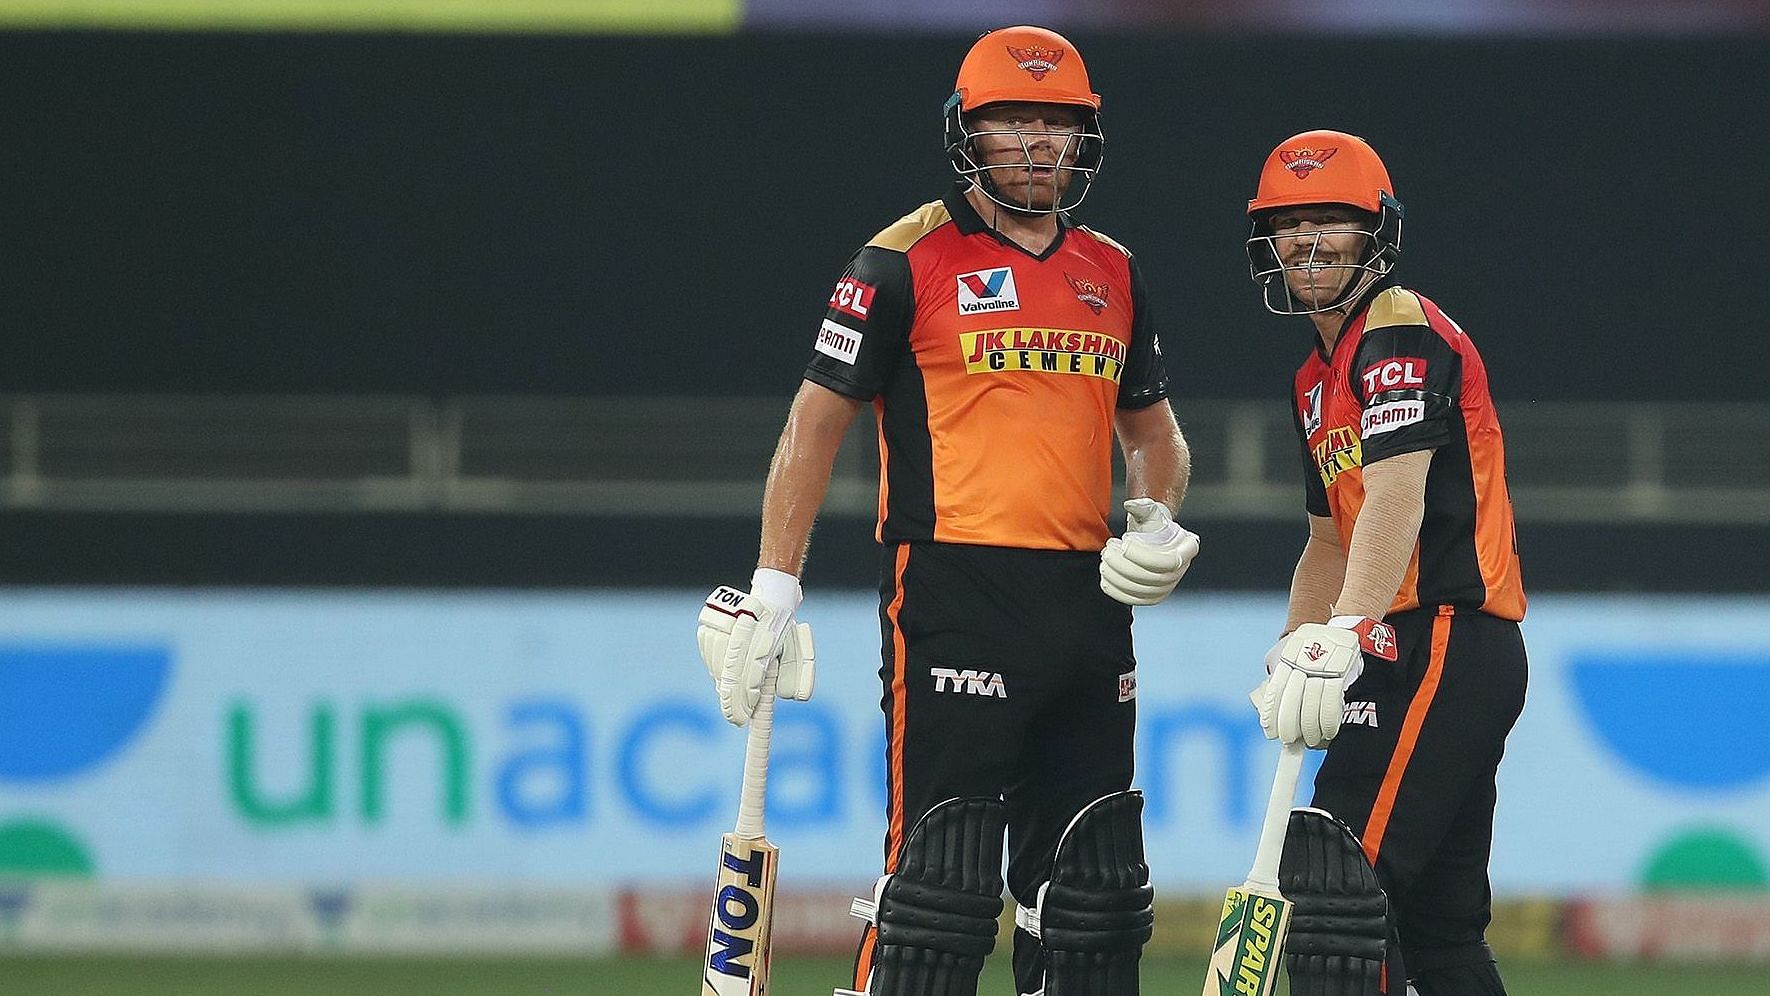 David Warner and Jonny Bairstow stitched a partnership of 160 runs in 15 overs to lay the platform for Sunrisers Hyderabad